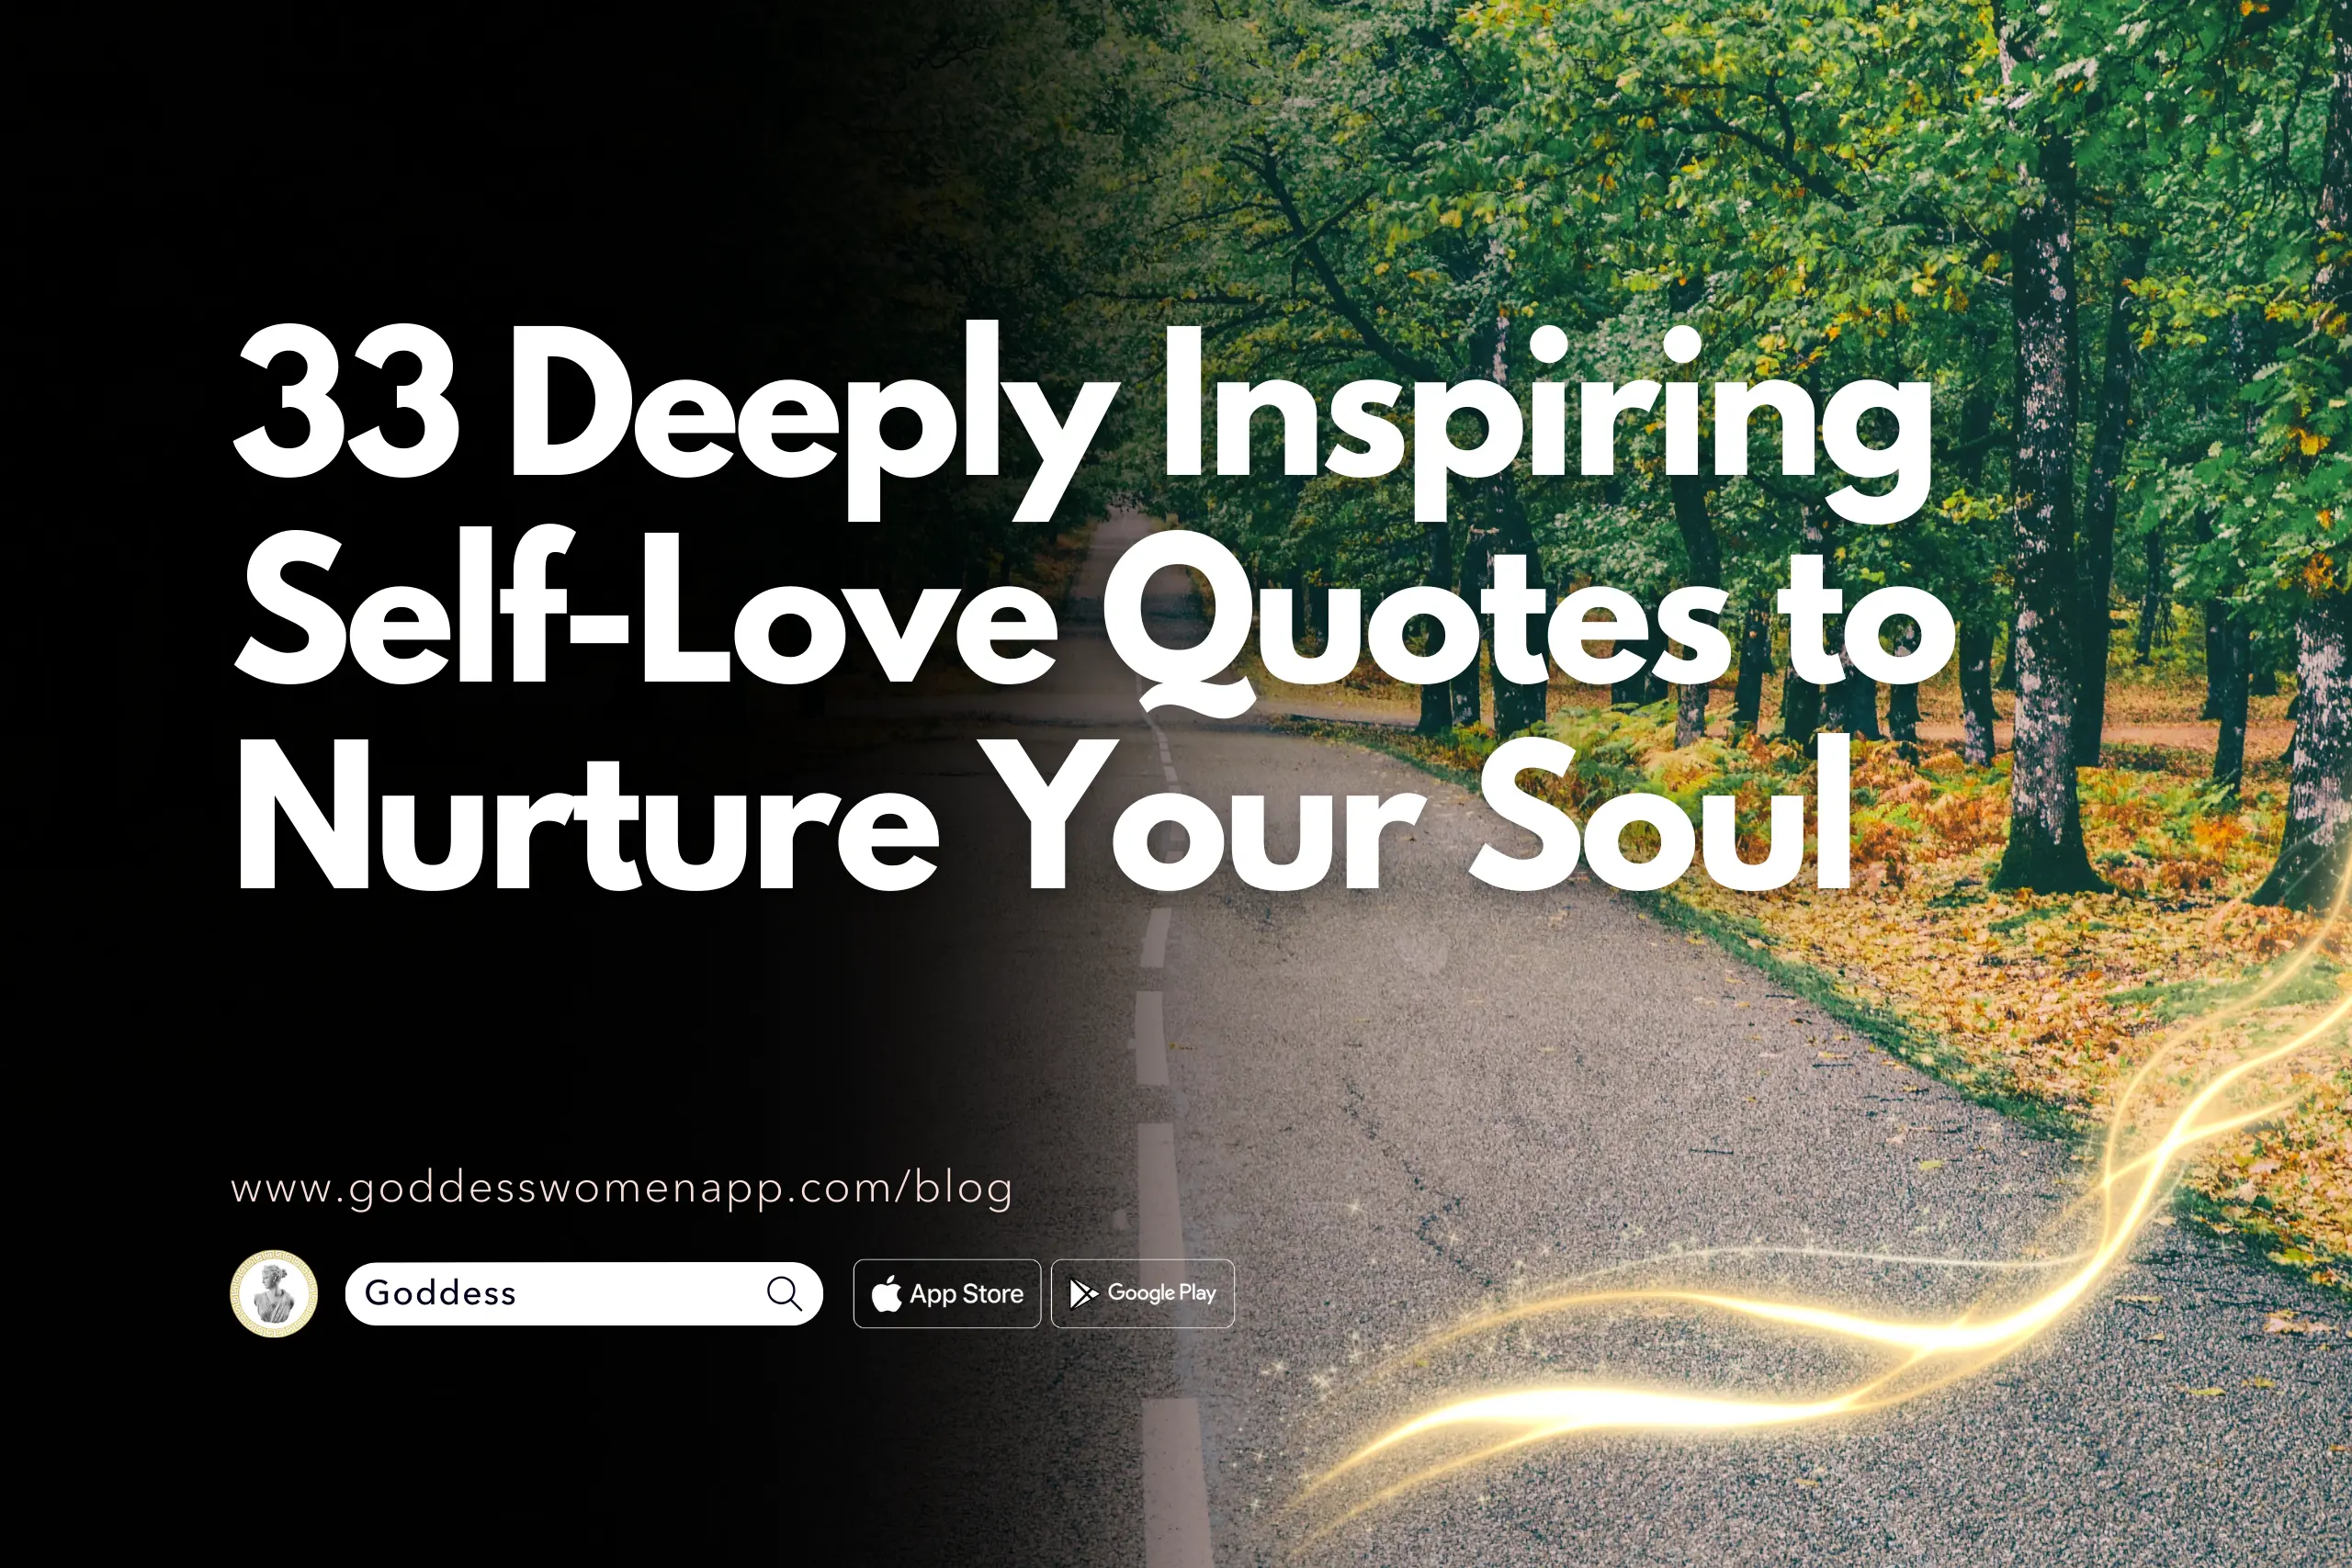 33 Deeply Inspiring Self-Love Quotes to Nurture Your Soul